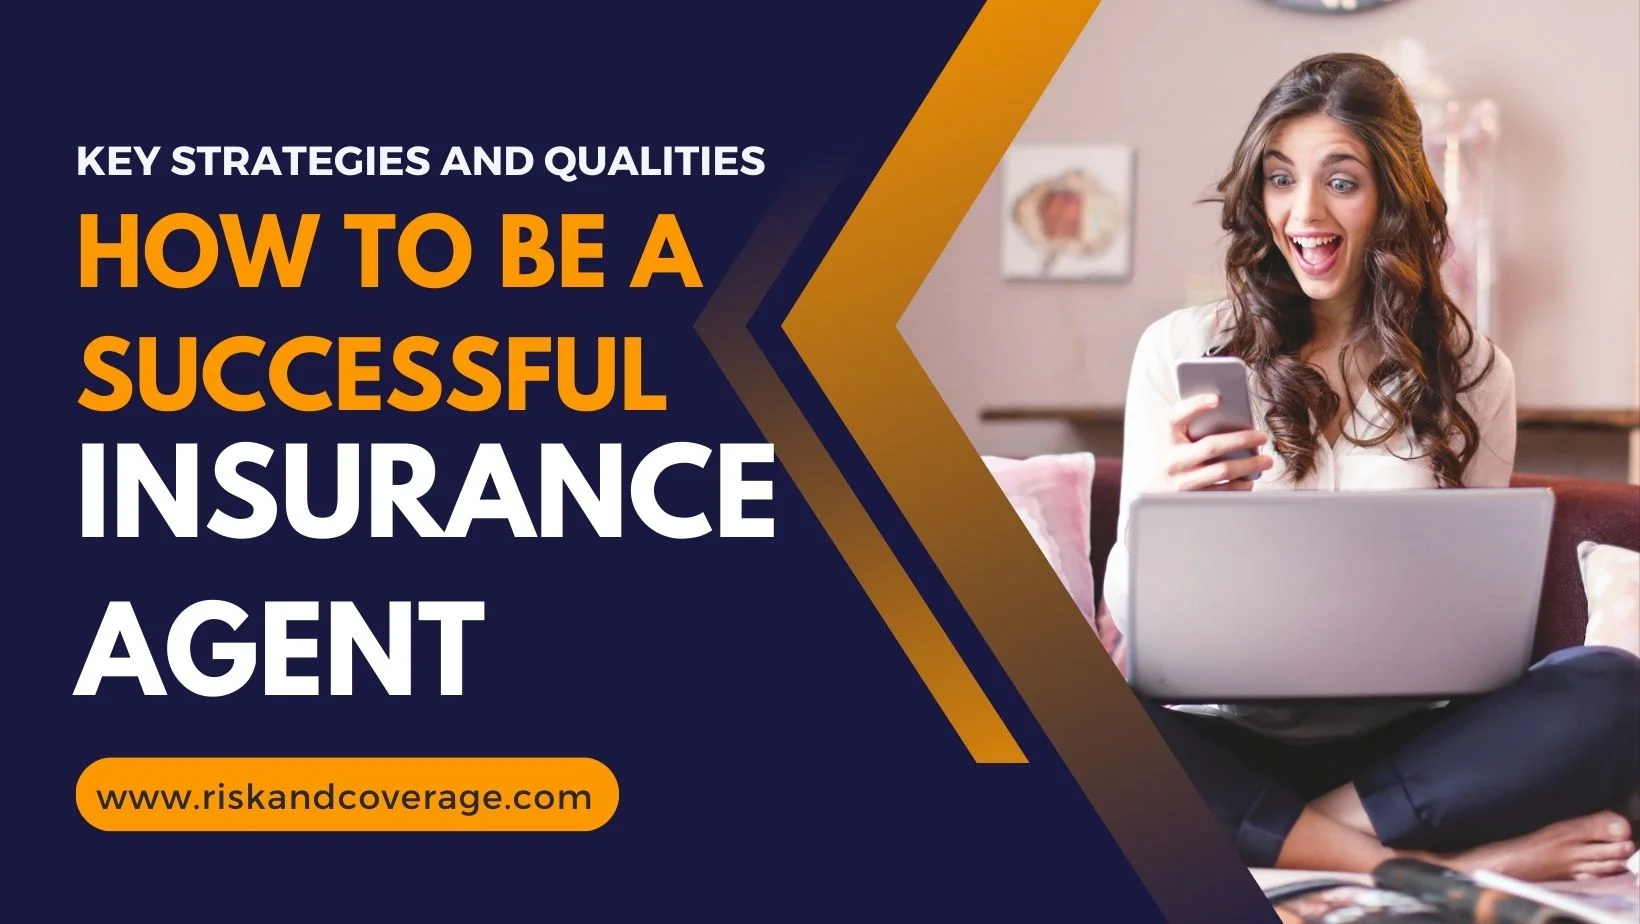 How to Be a Successful Insurance Agent